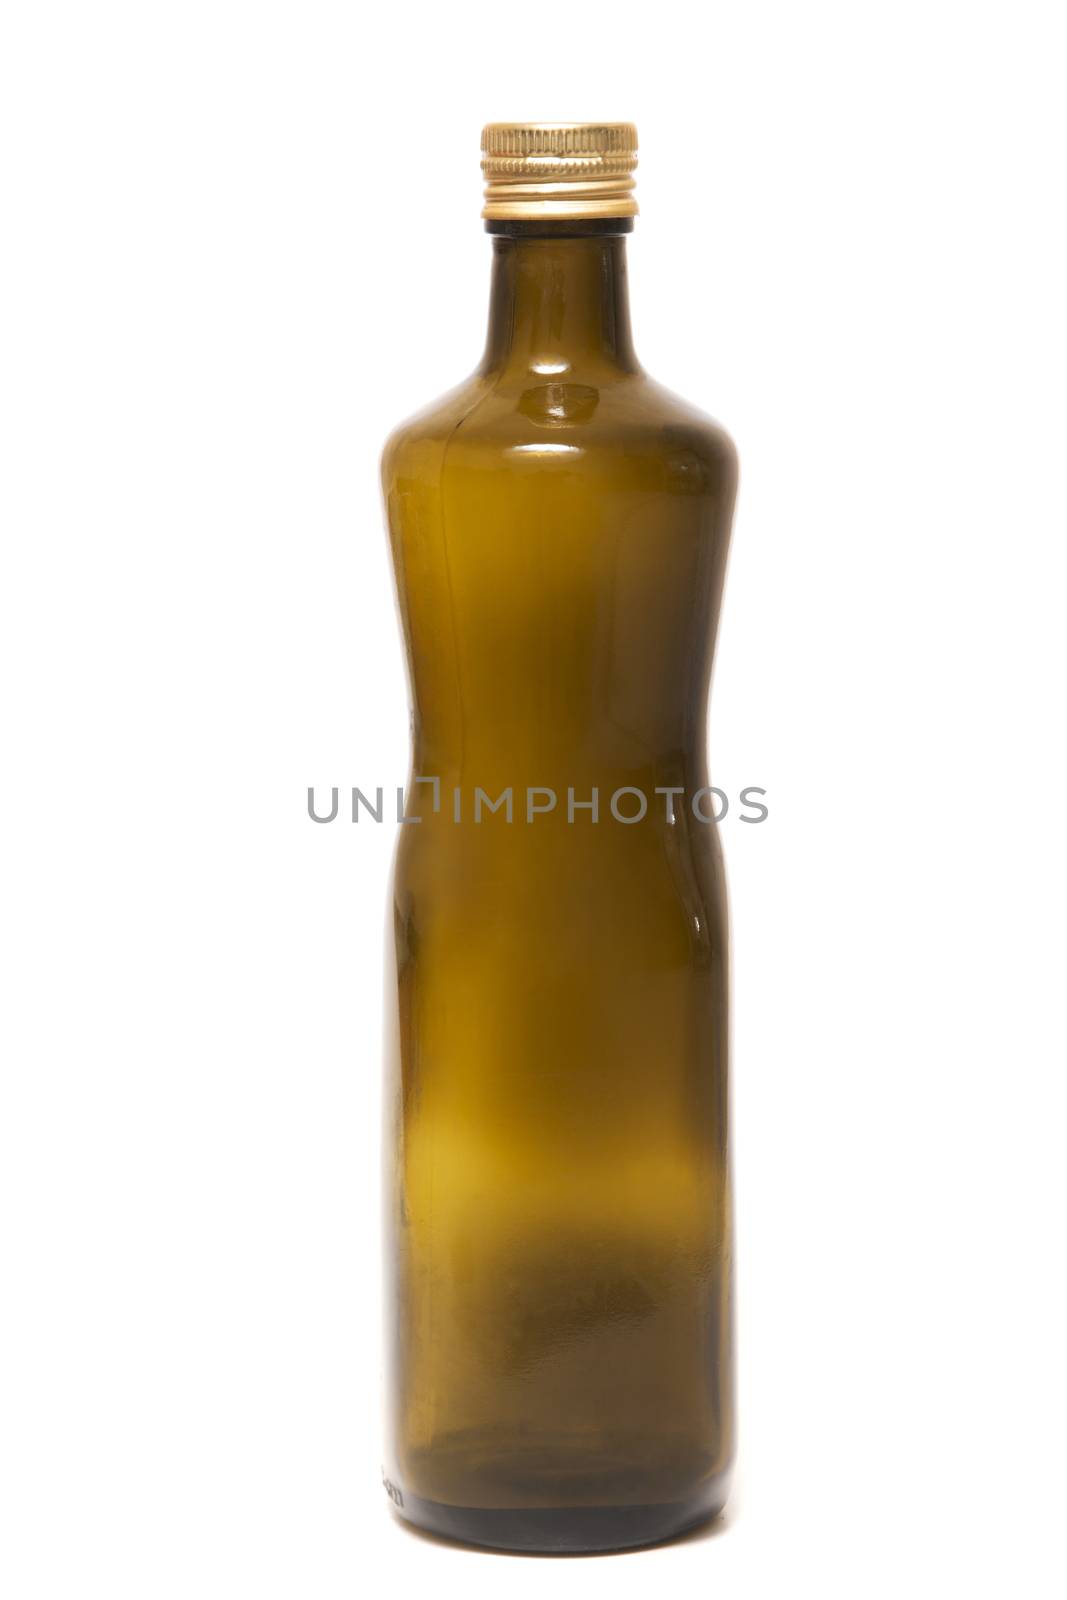 Brown glass empty olive oil bottle isolated on a white background.